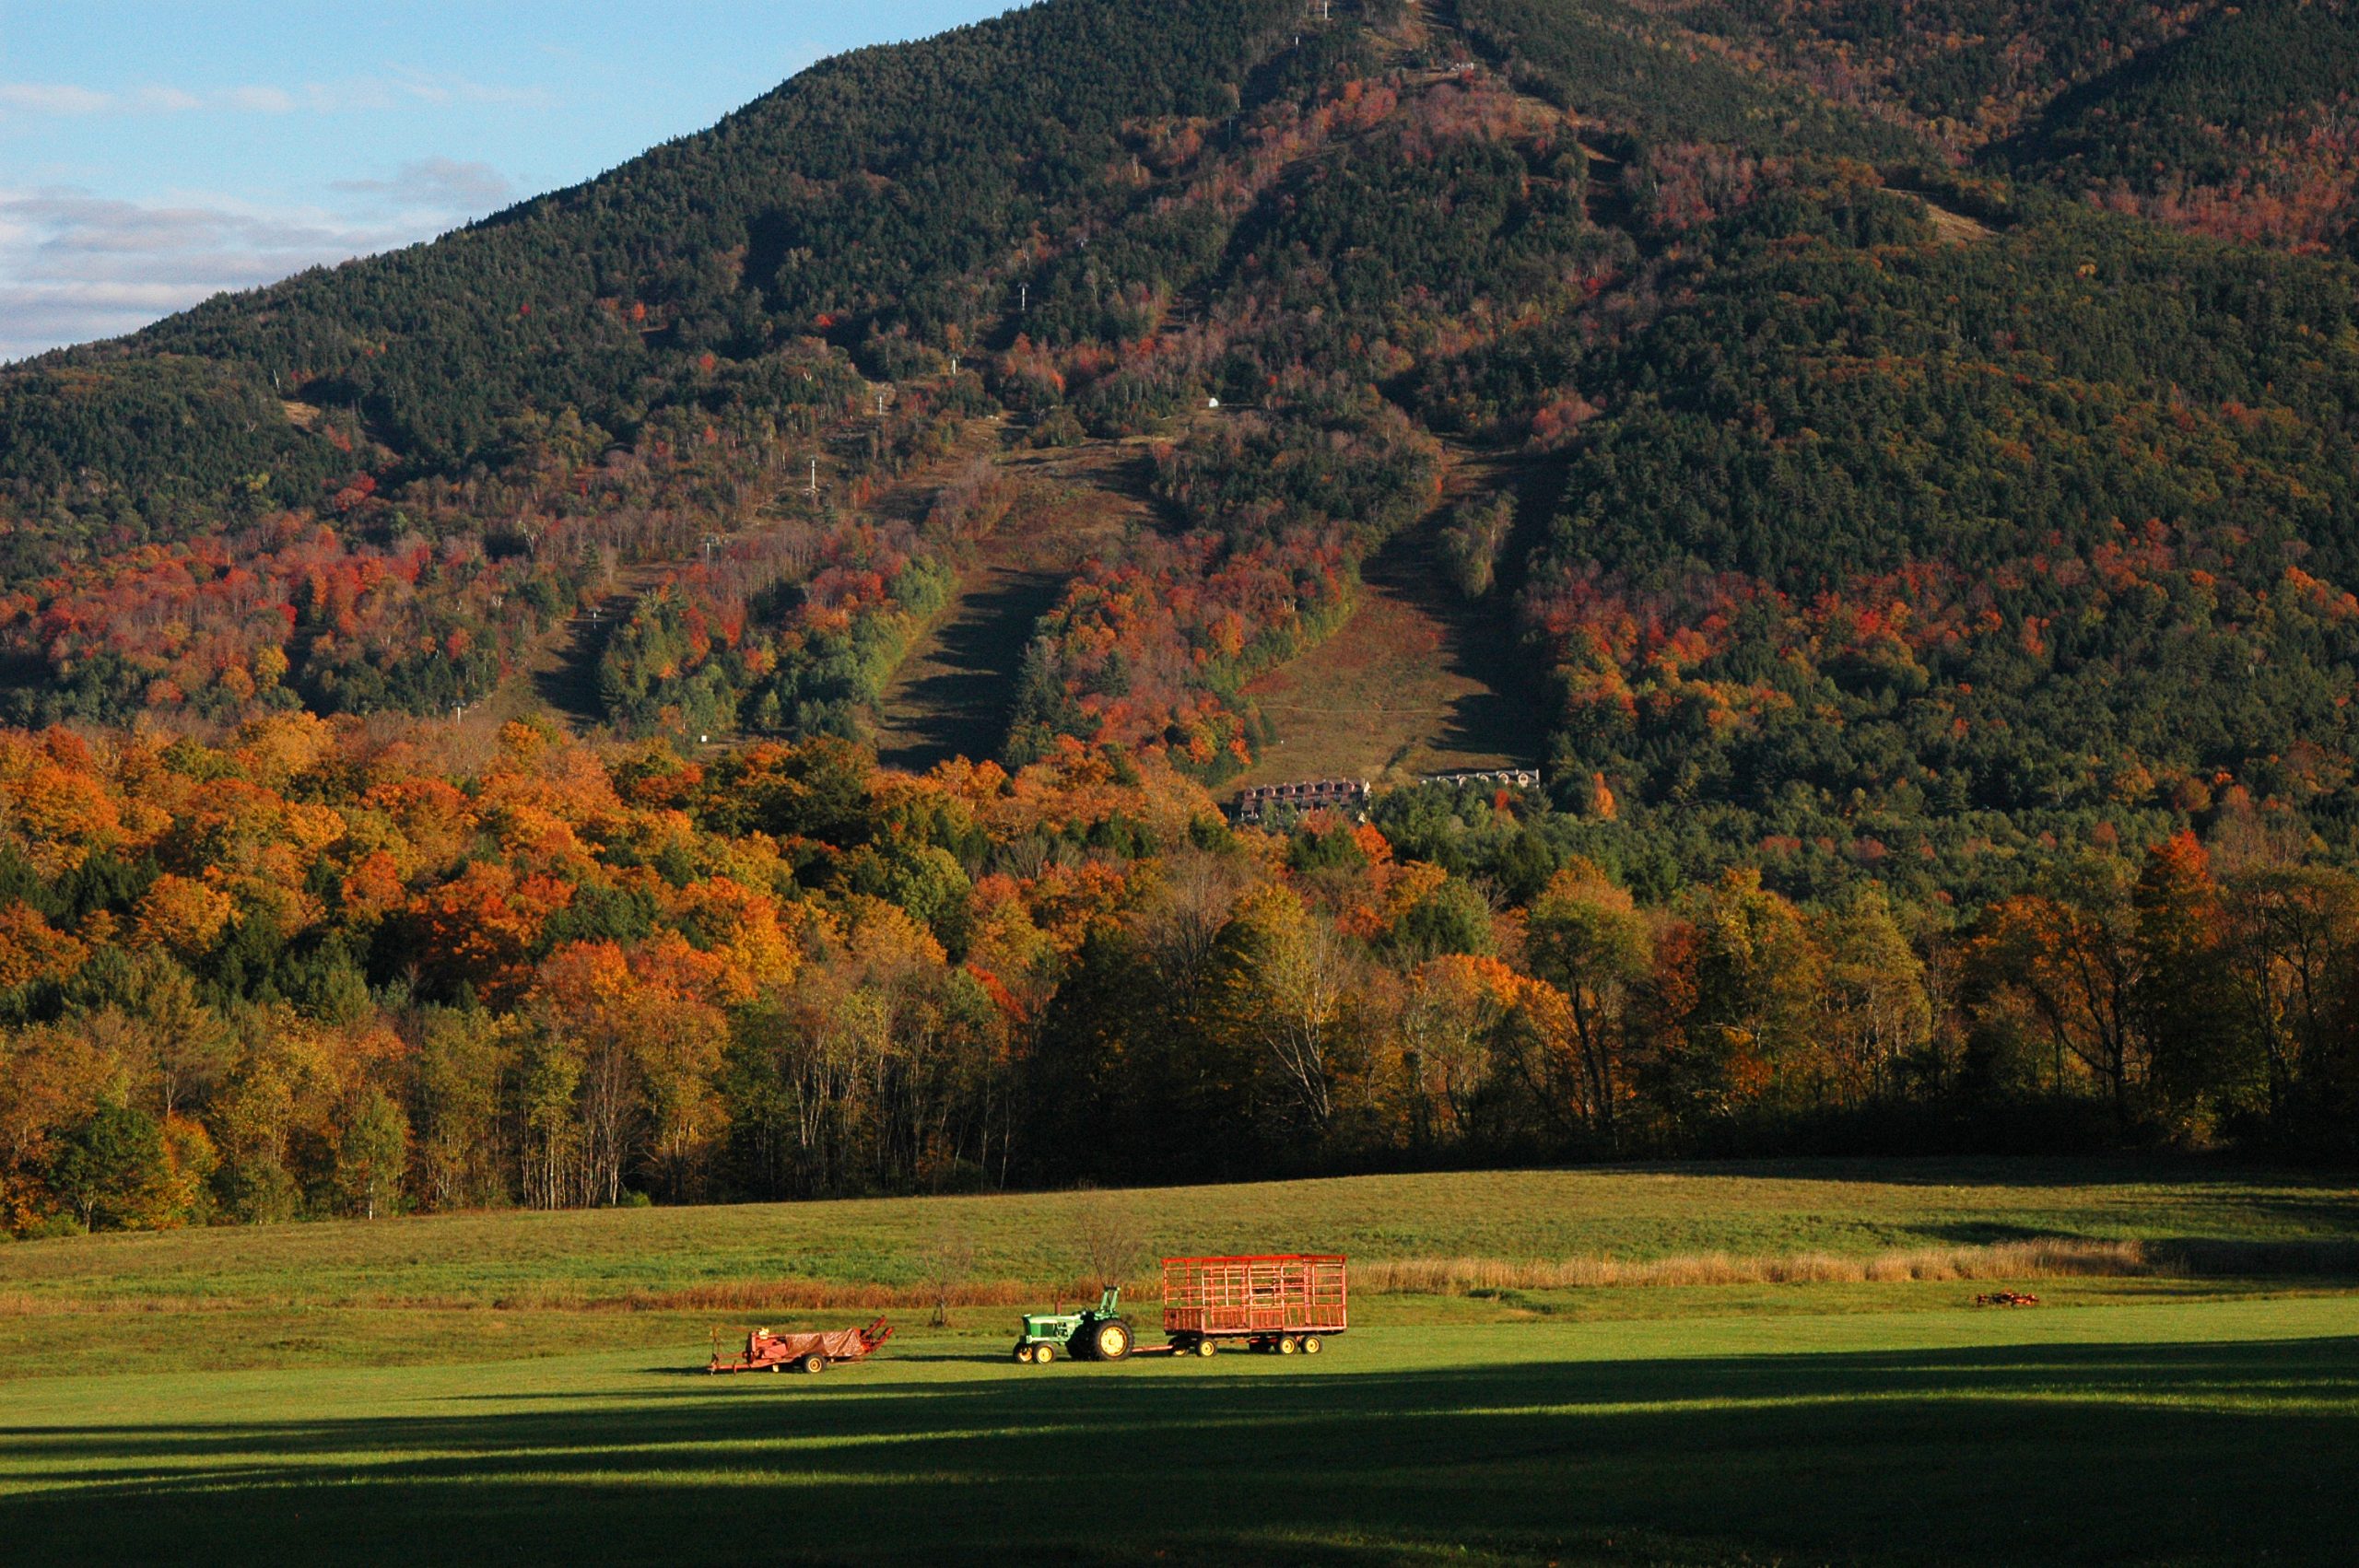 Tractor Below Mt. Ascutney (user submitted)